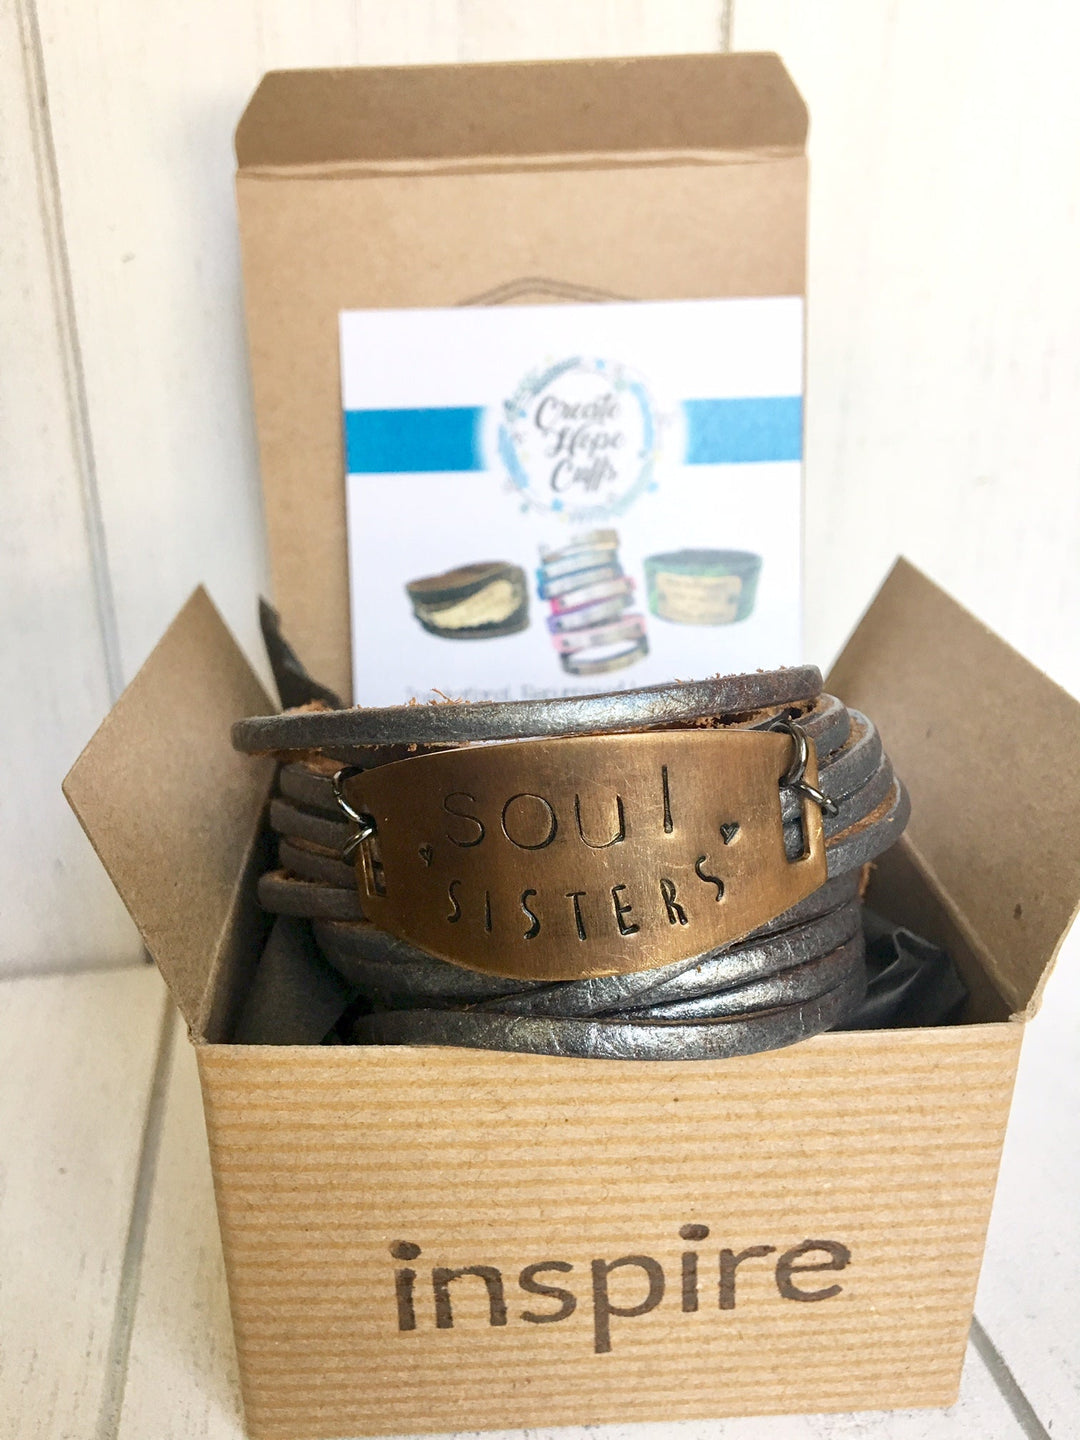 Pewter Leather 'Soul Sisters' Wrap & Bronze Shield Bracelet, adjustable Leather Wrap Create Hope Cuffs 